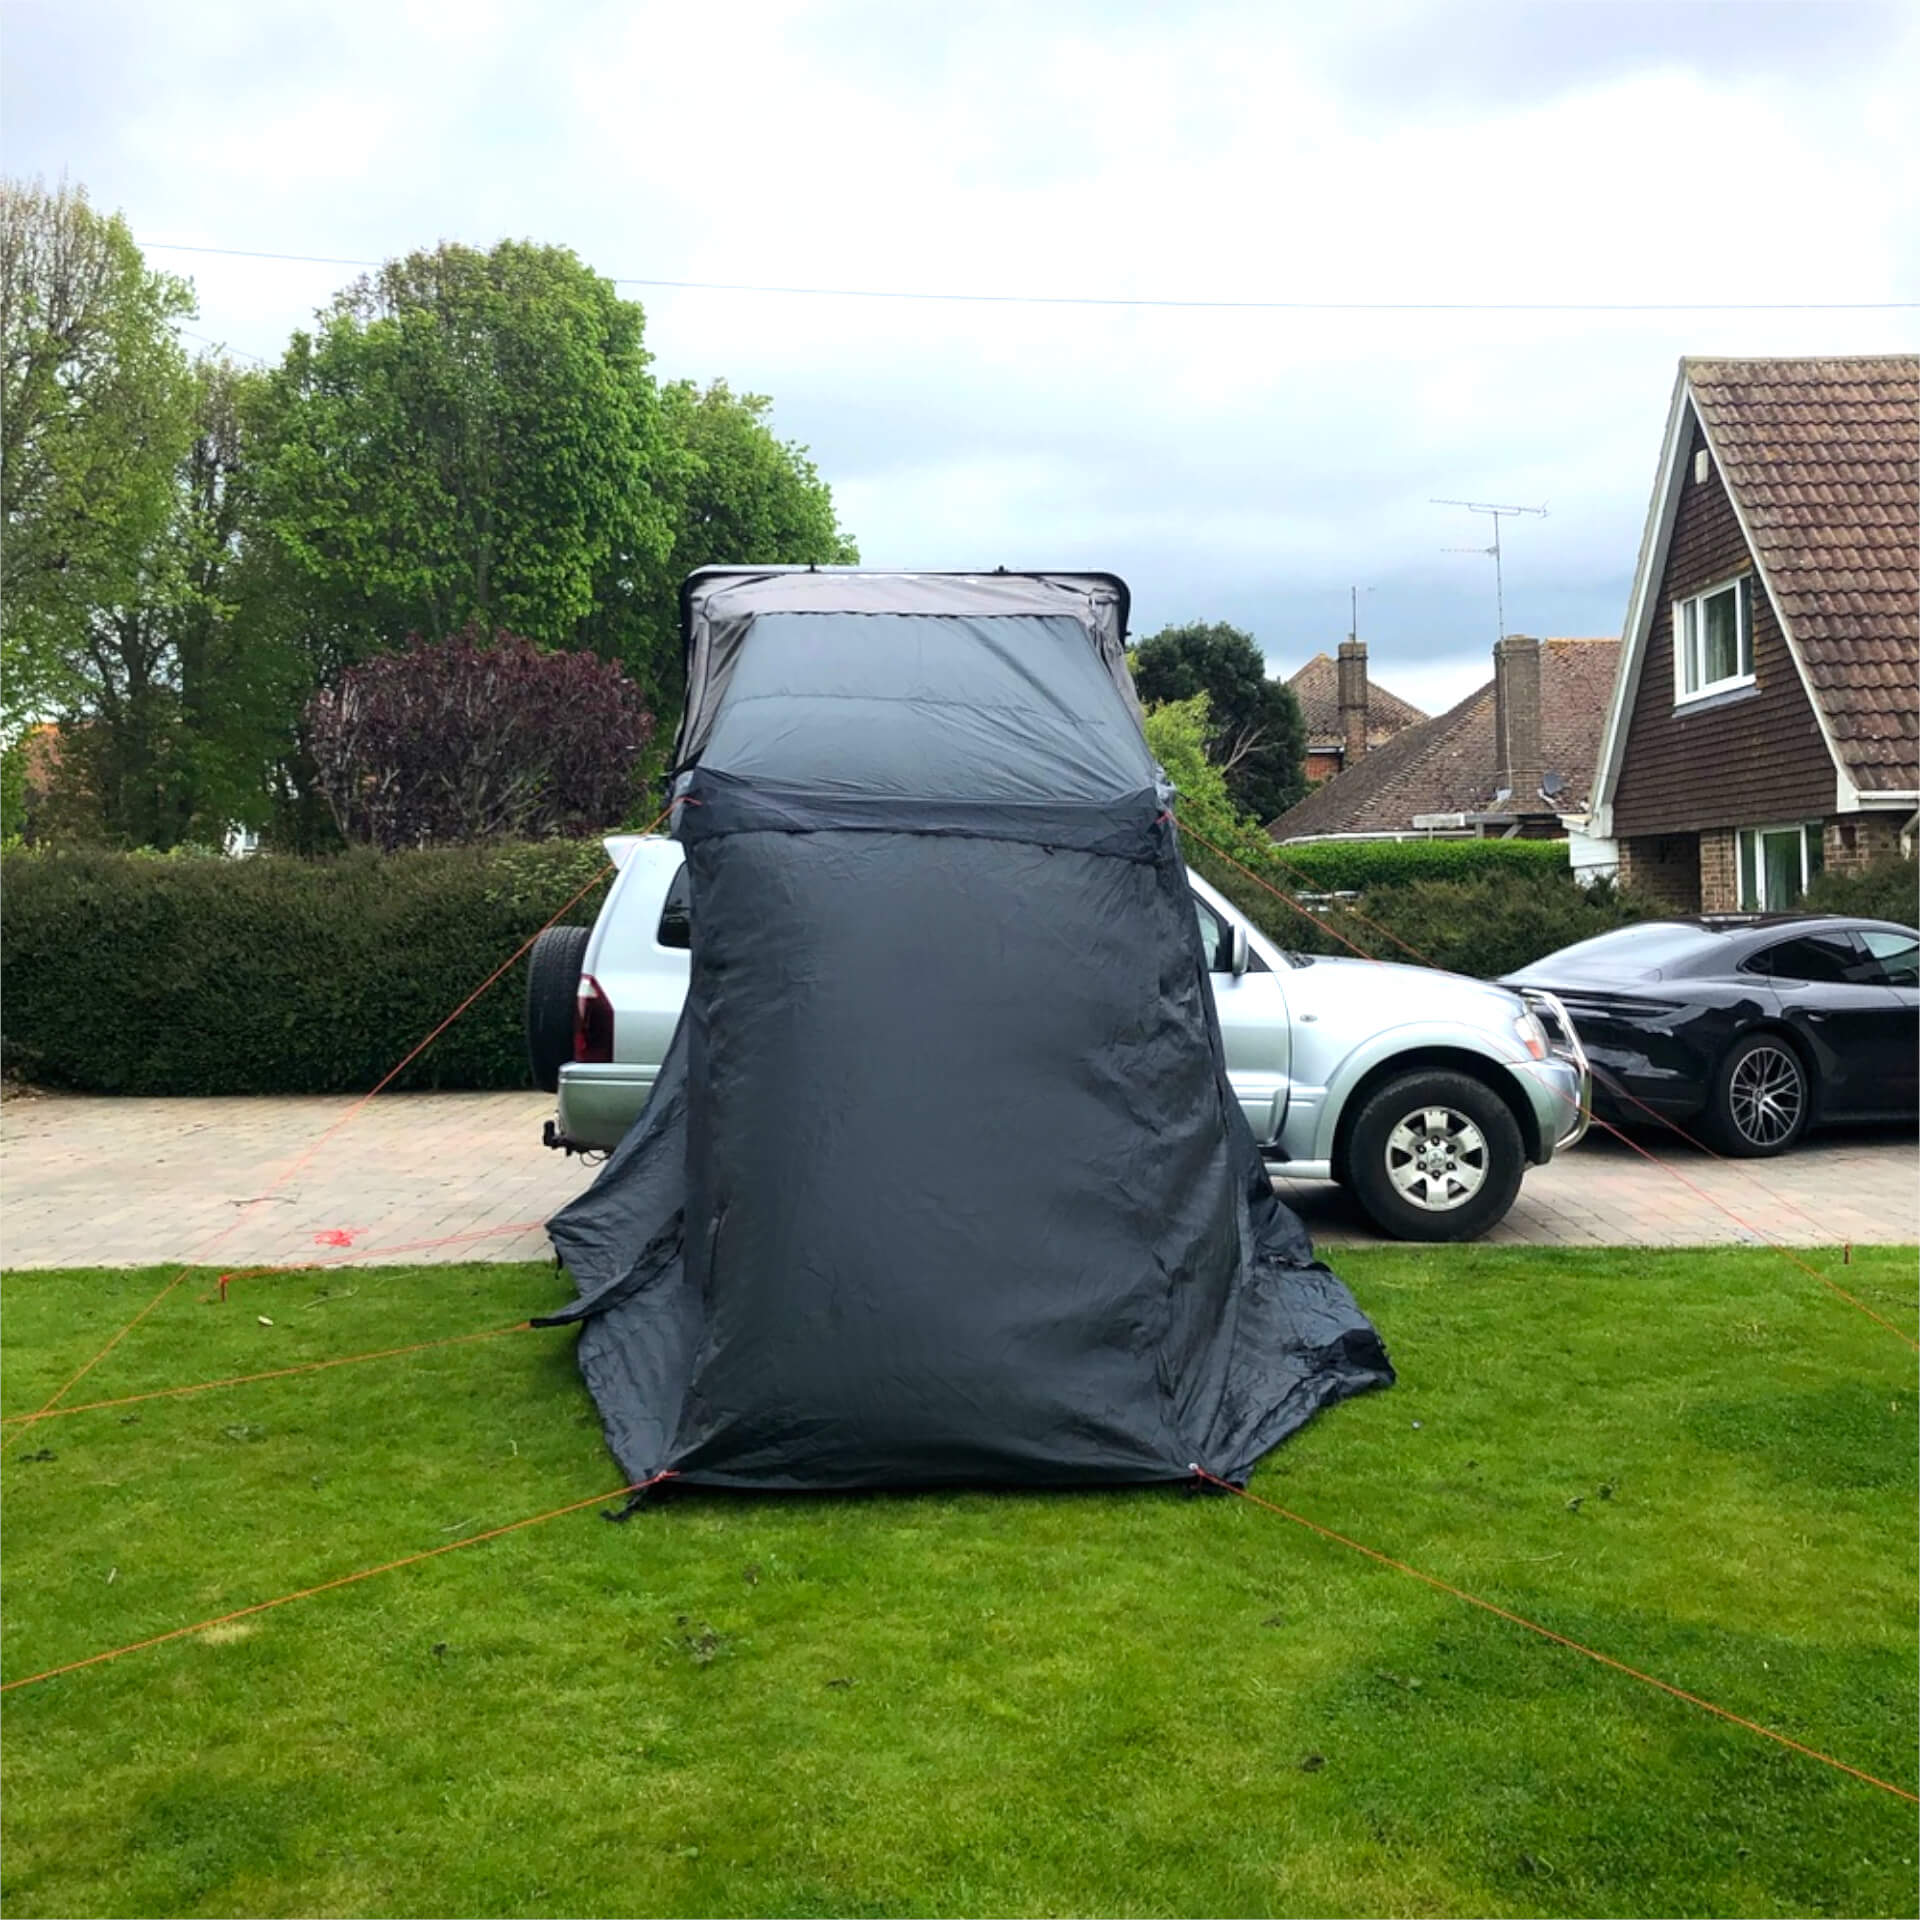 Annex Addon for the Direct4x4 RoofTrekk 4 Person Roof Top Camping Tent in Grey -  - sold by Direct4x4